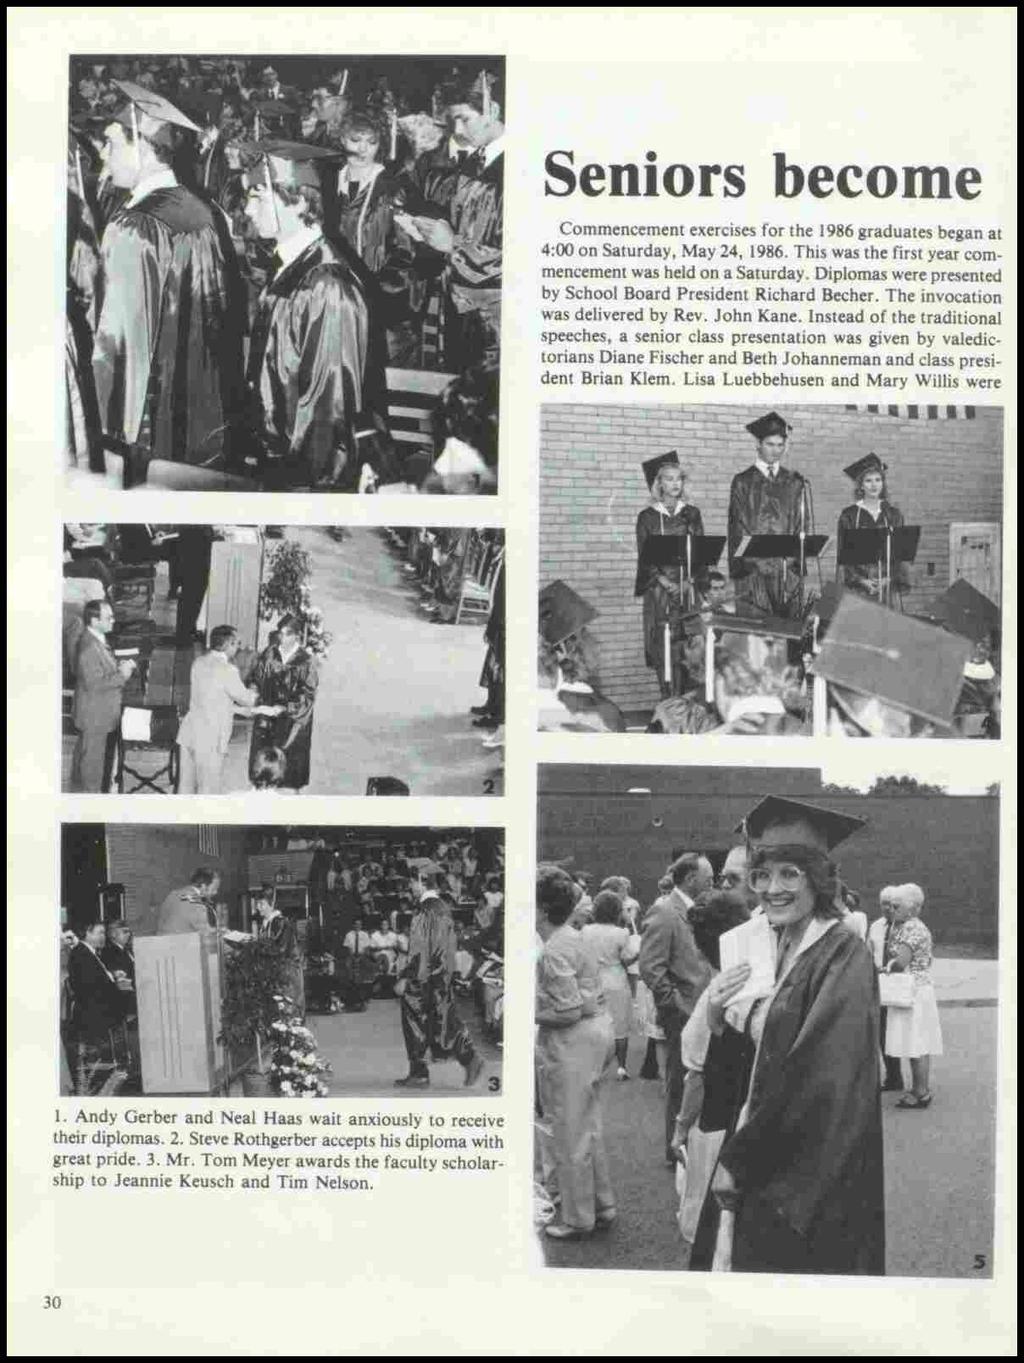 Seniors become Commencement exercises for the 1986 graduates began at 4:00 on Saturday, May 24, 1986. This was the first year commencement was held on a Saturday.